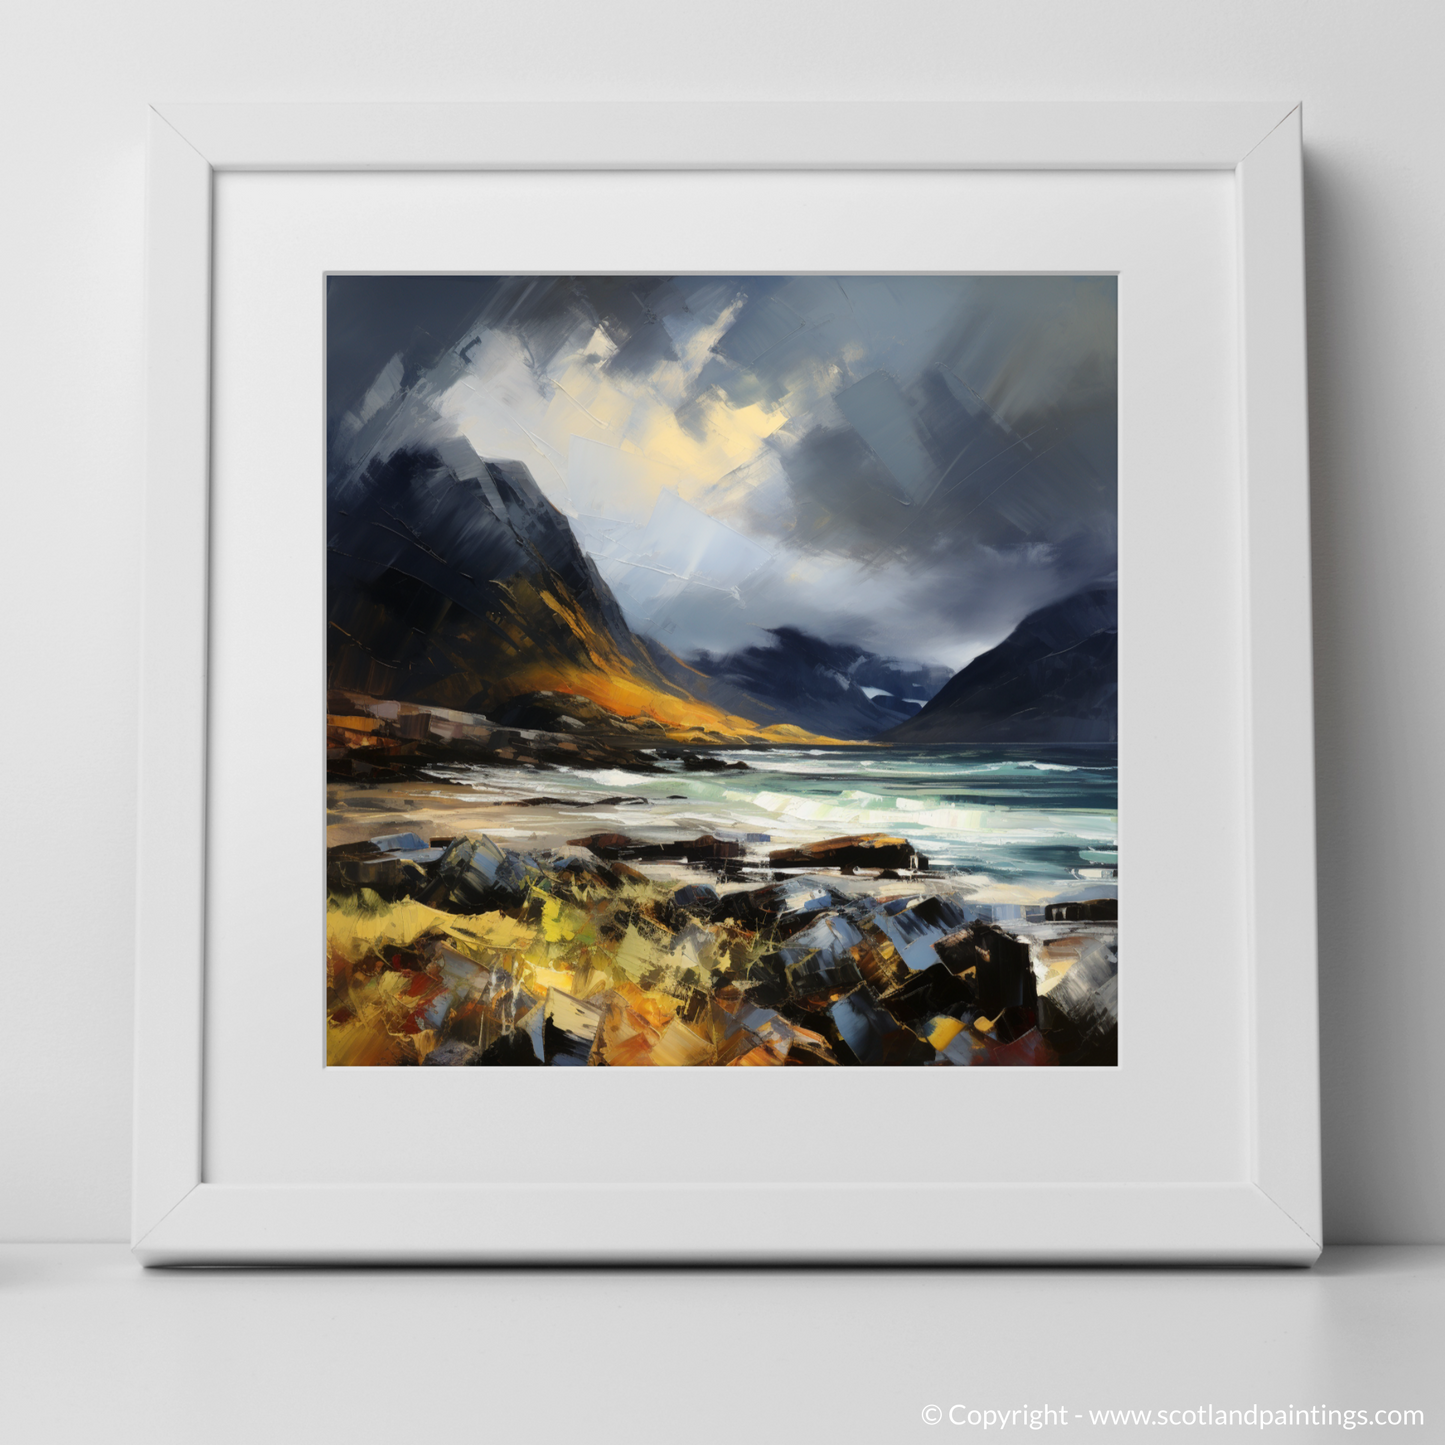 Art Print of Elgol Bay with a stormy sky with a white frame